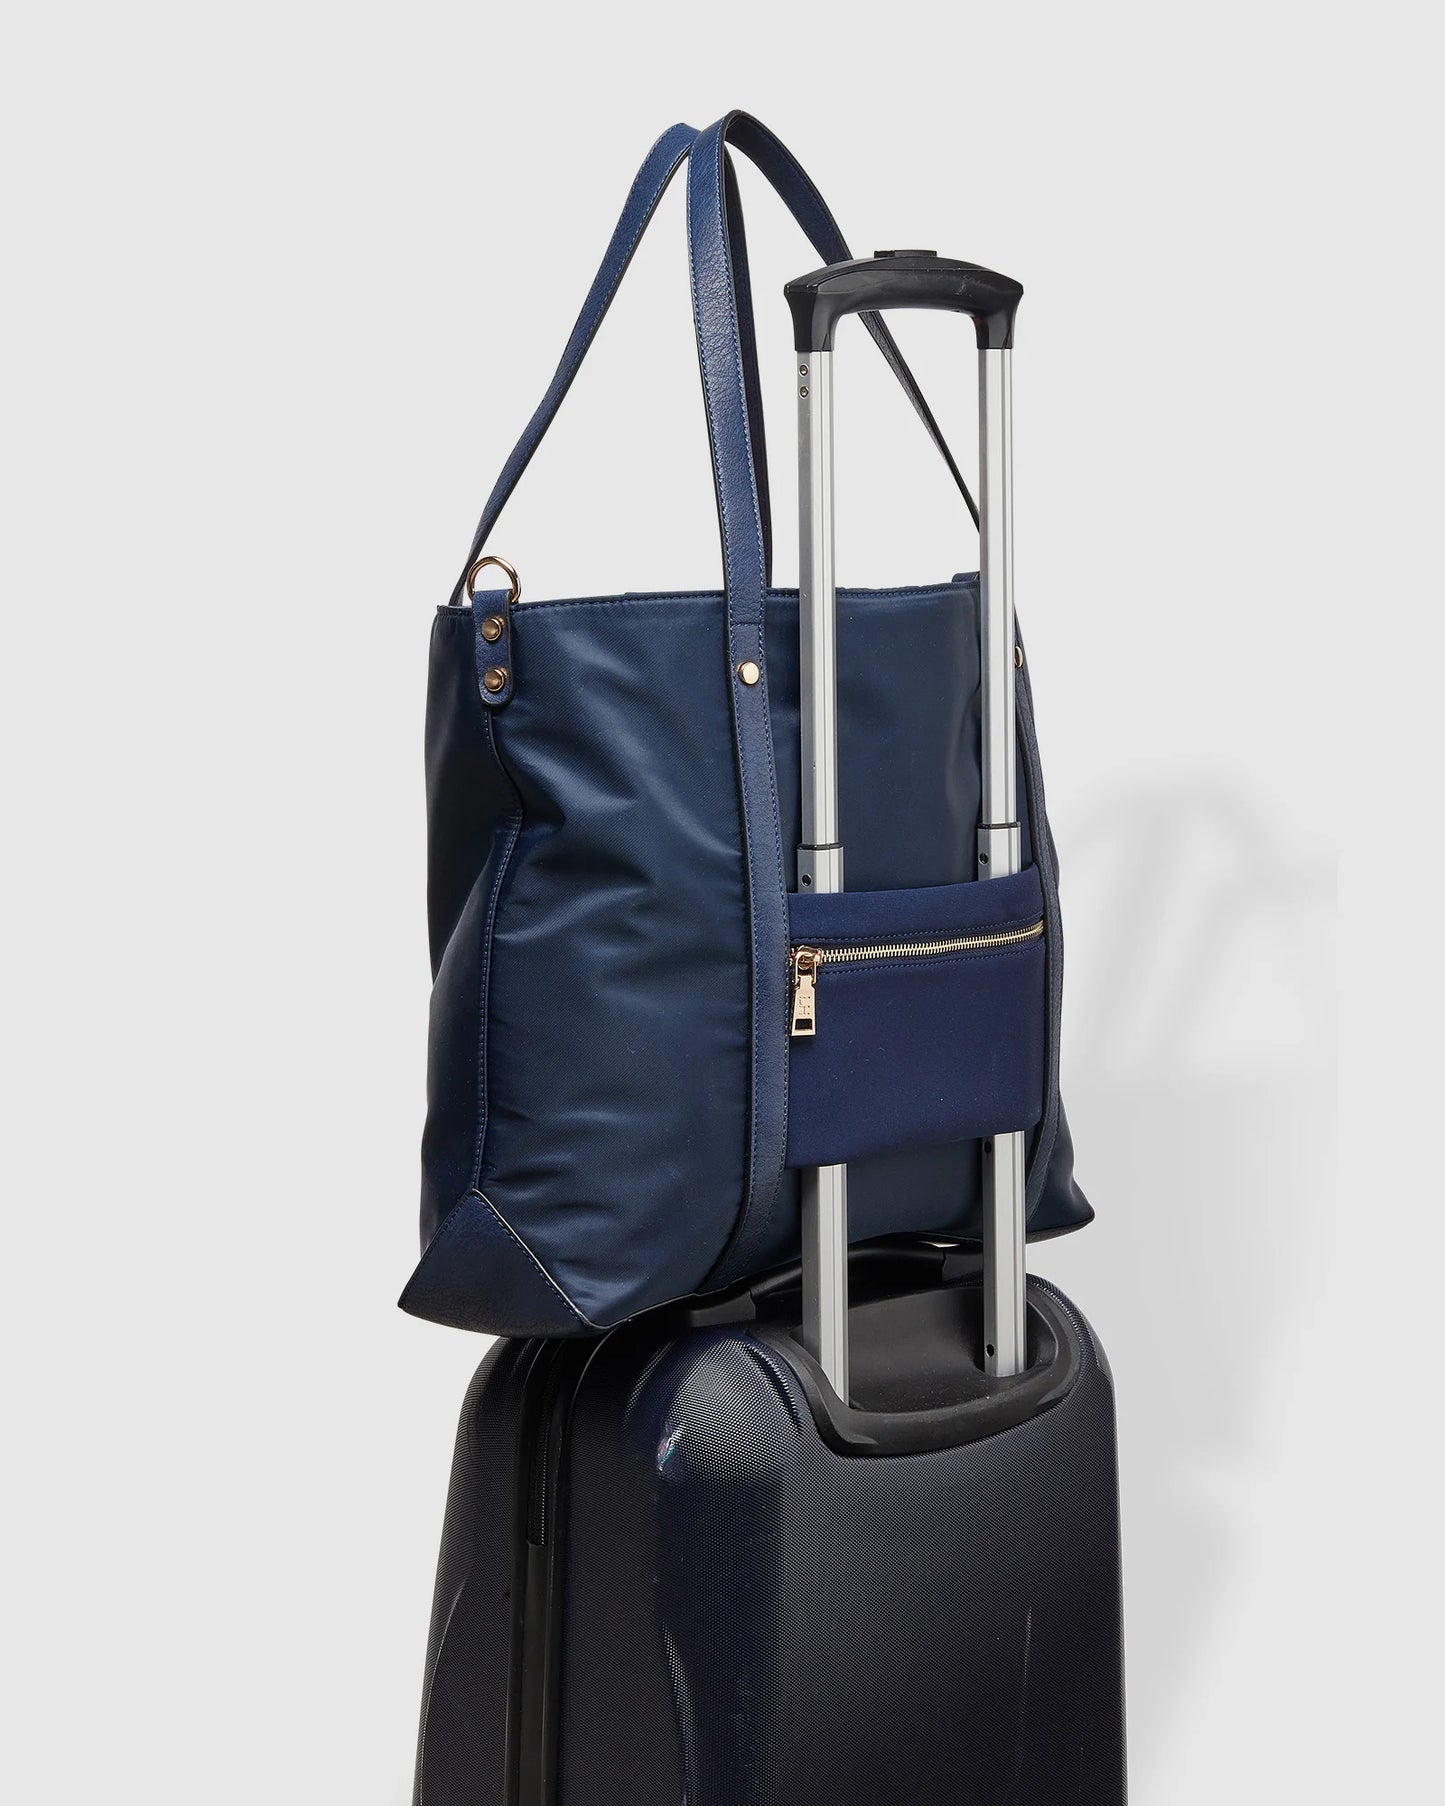 Nora Travel Tote in Navy